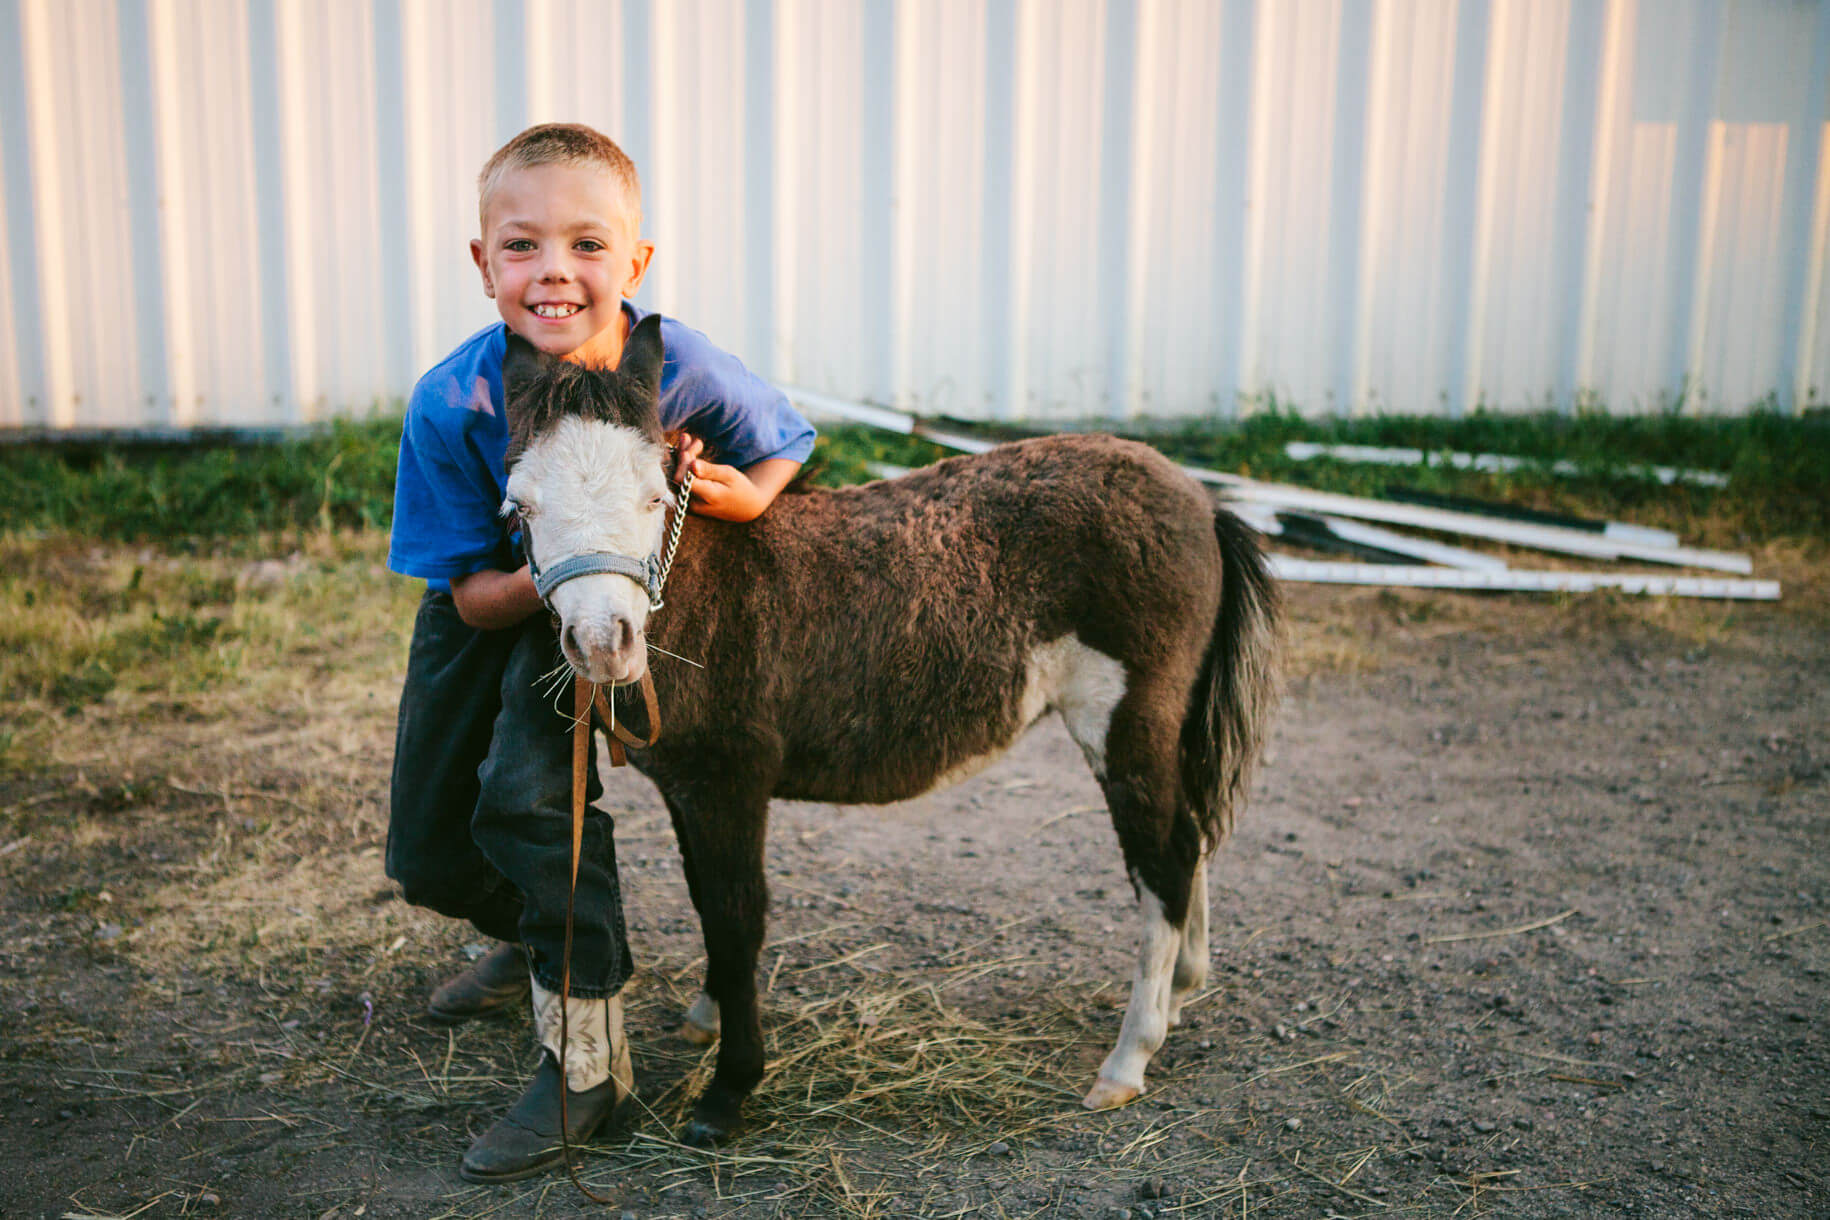 A boy hugs his pony at the Western Montana State Fair in Missoula Montana